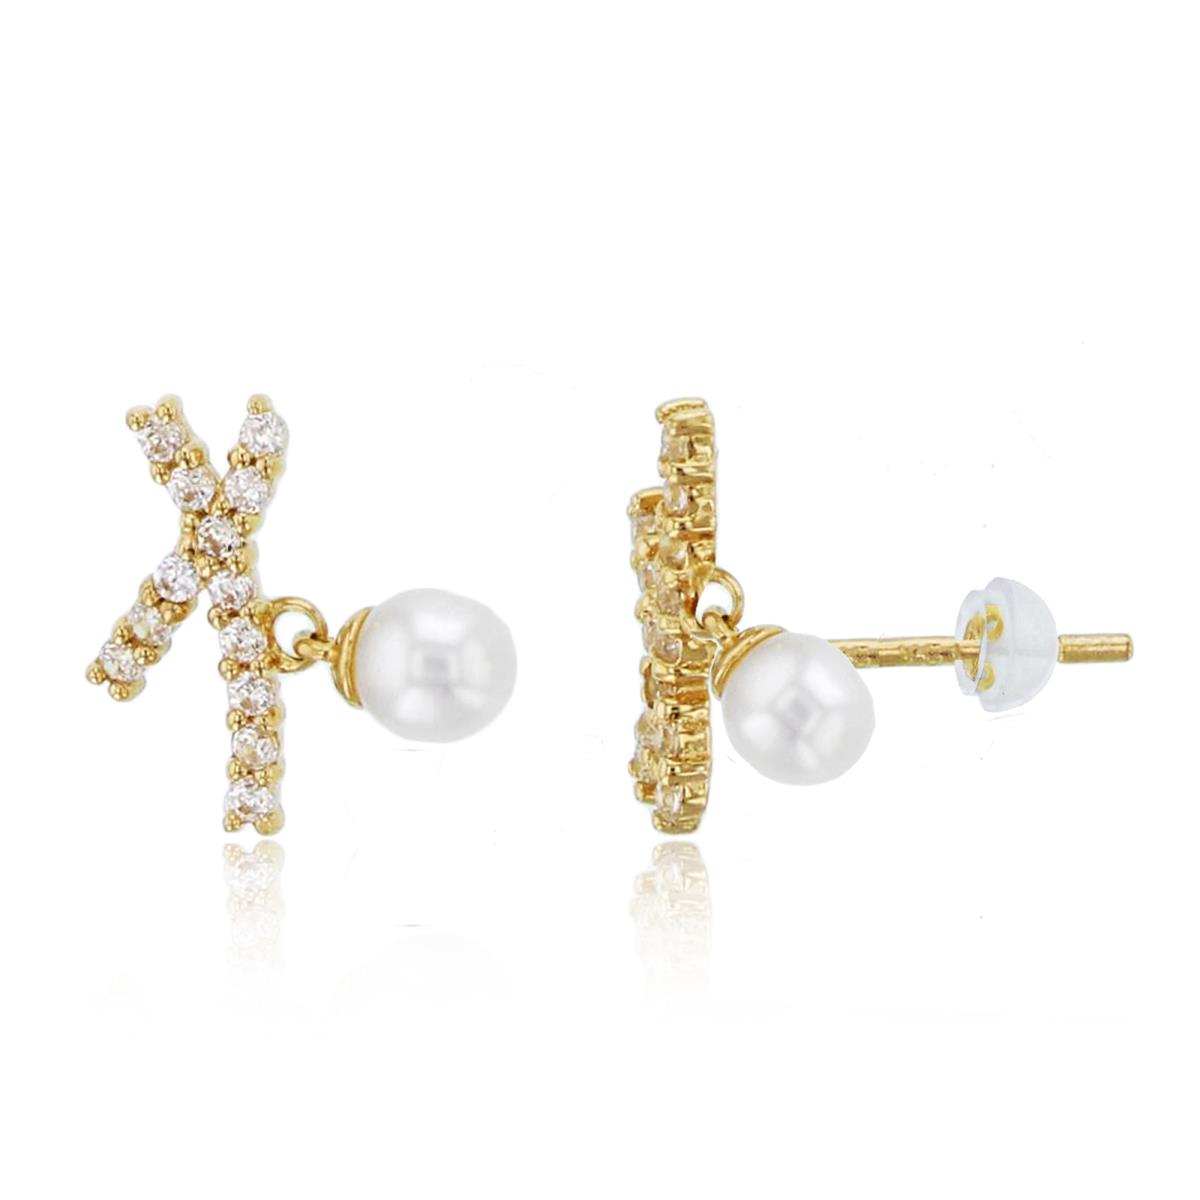 14K Yellow Gold Rnd CZ & Dangling Fresh Water Pearl Criss/Cross Studs with Silicon Backs